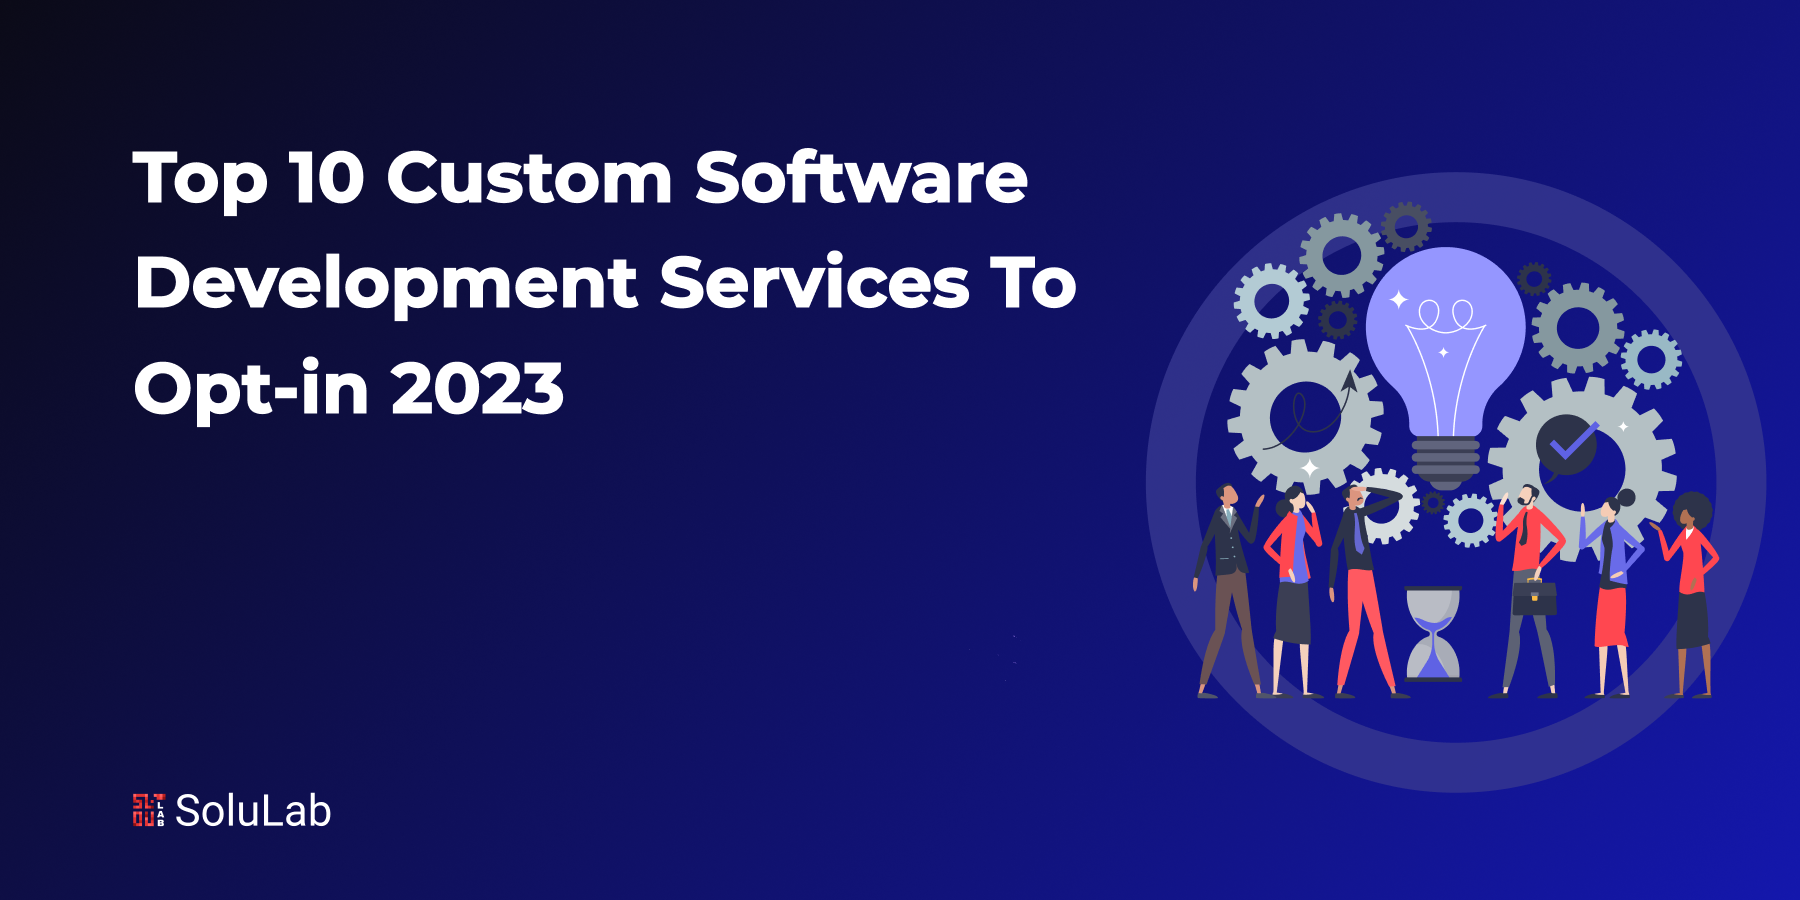 Top 10 Custom Software Development Services To Opt-in 2023